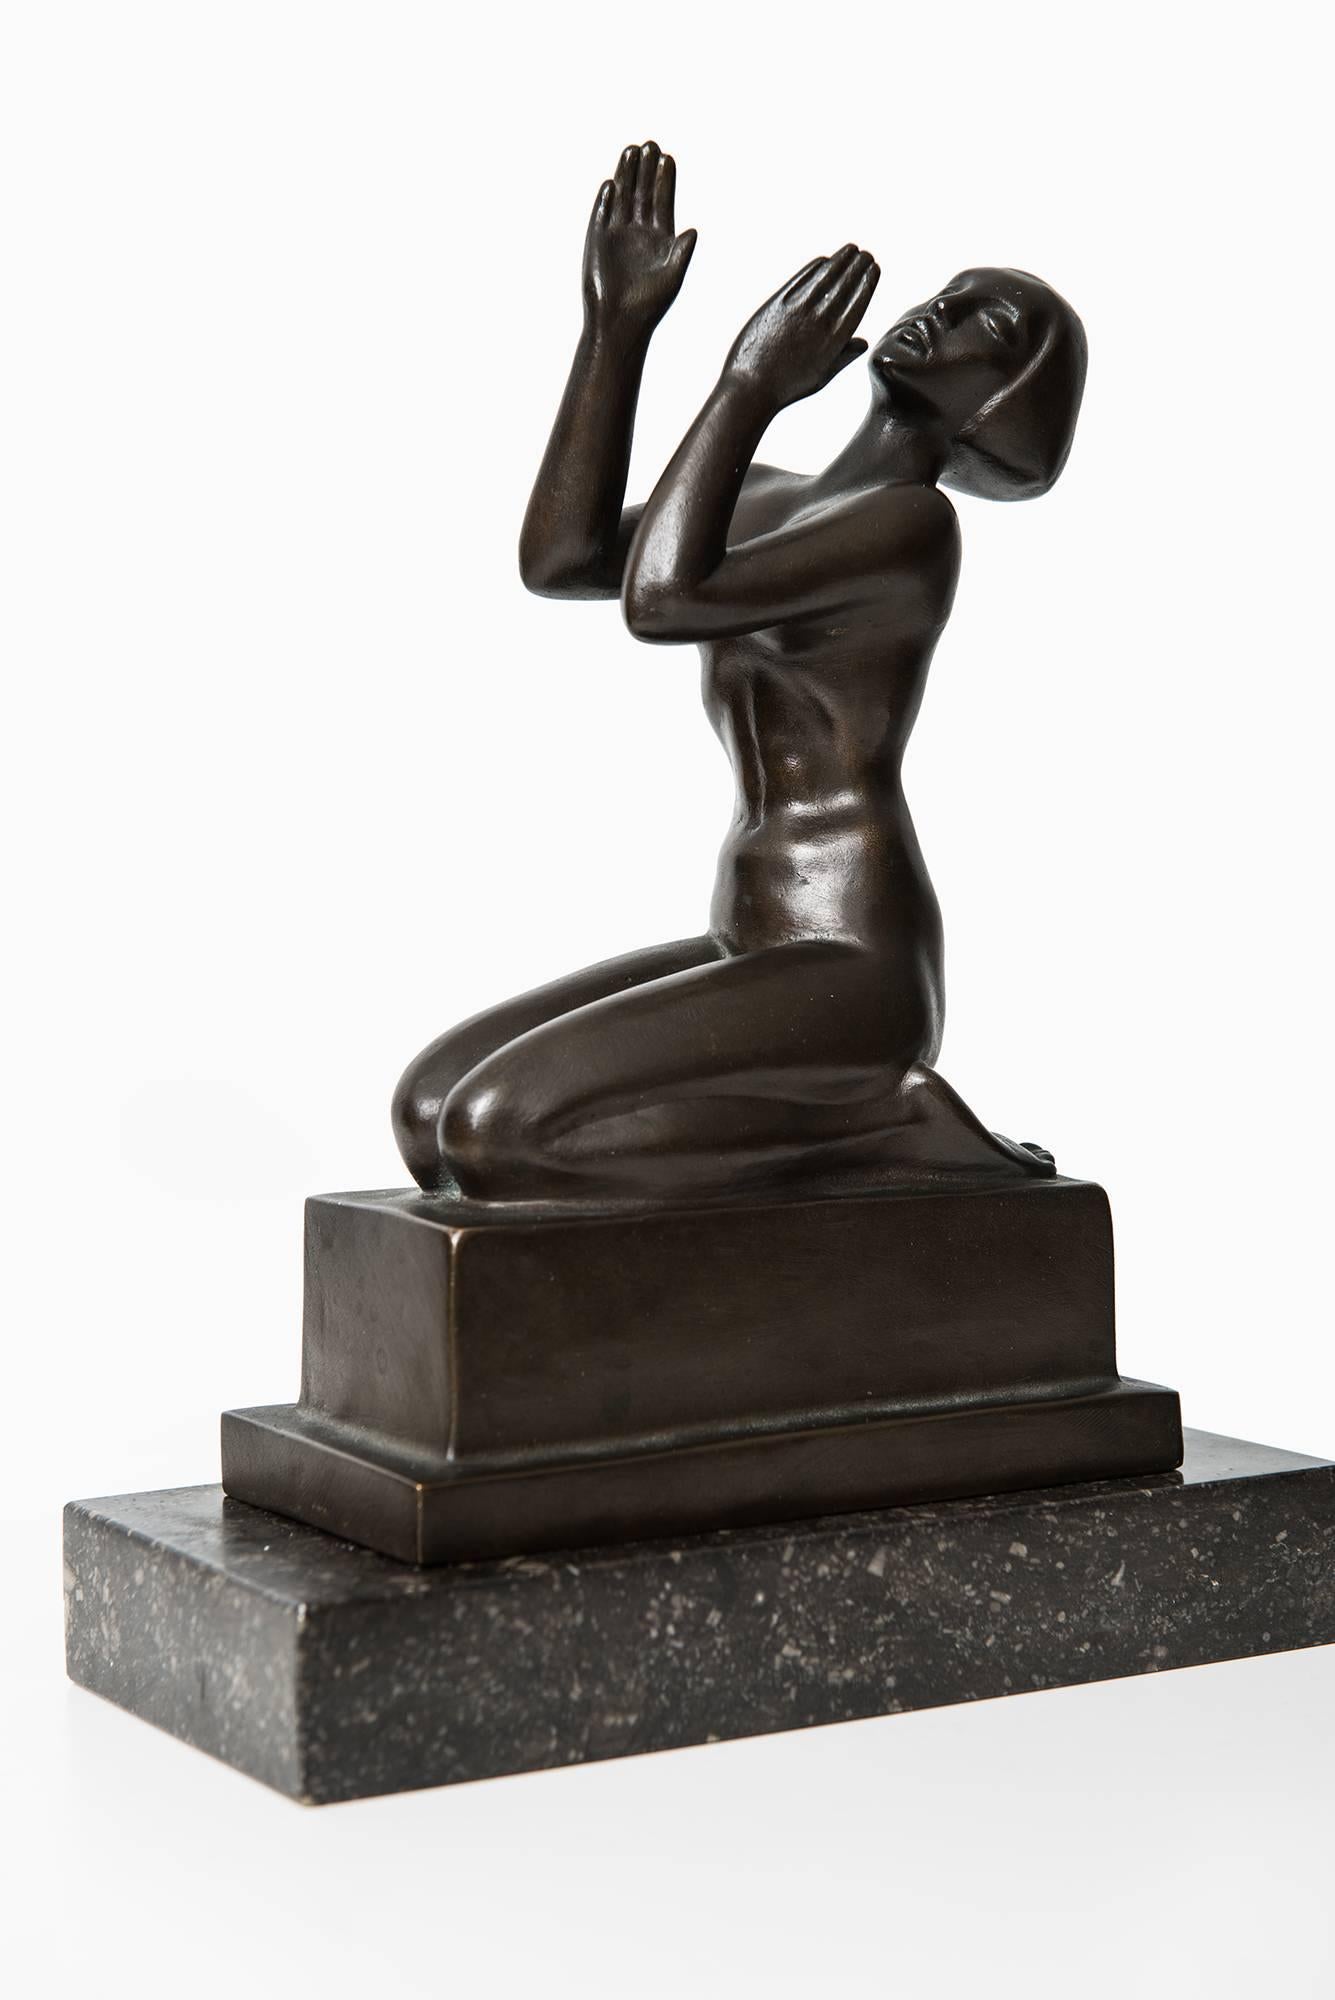 Rare sculpture in bronze made by Knut Jern. Produced by Otto Meyers foundry in Sweden.